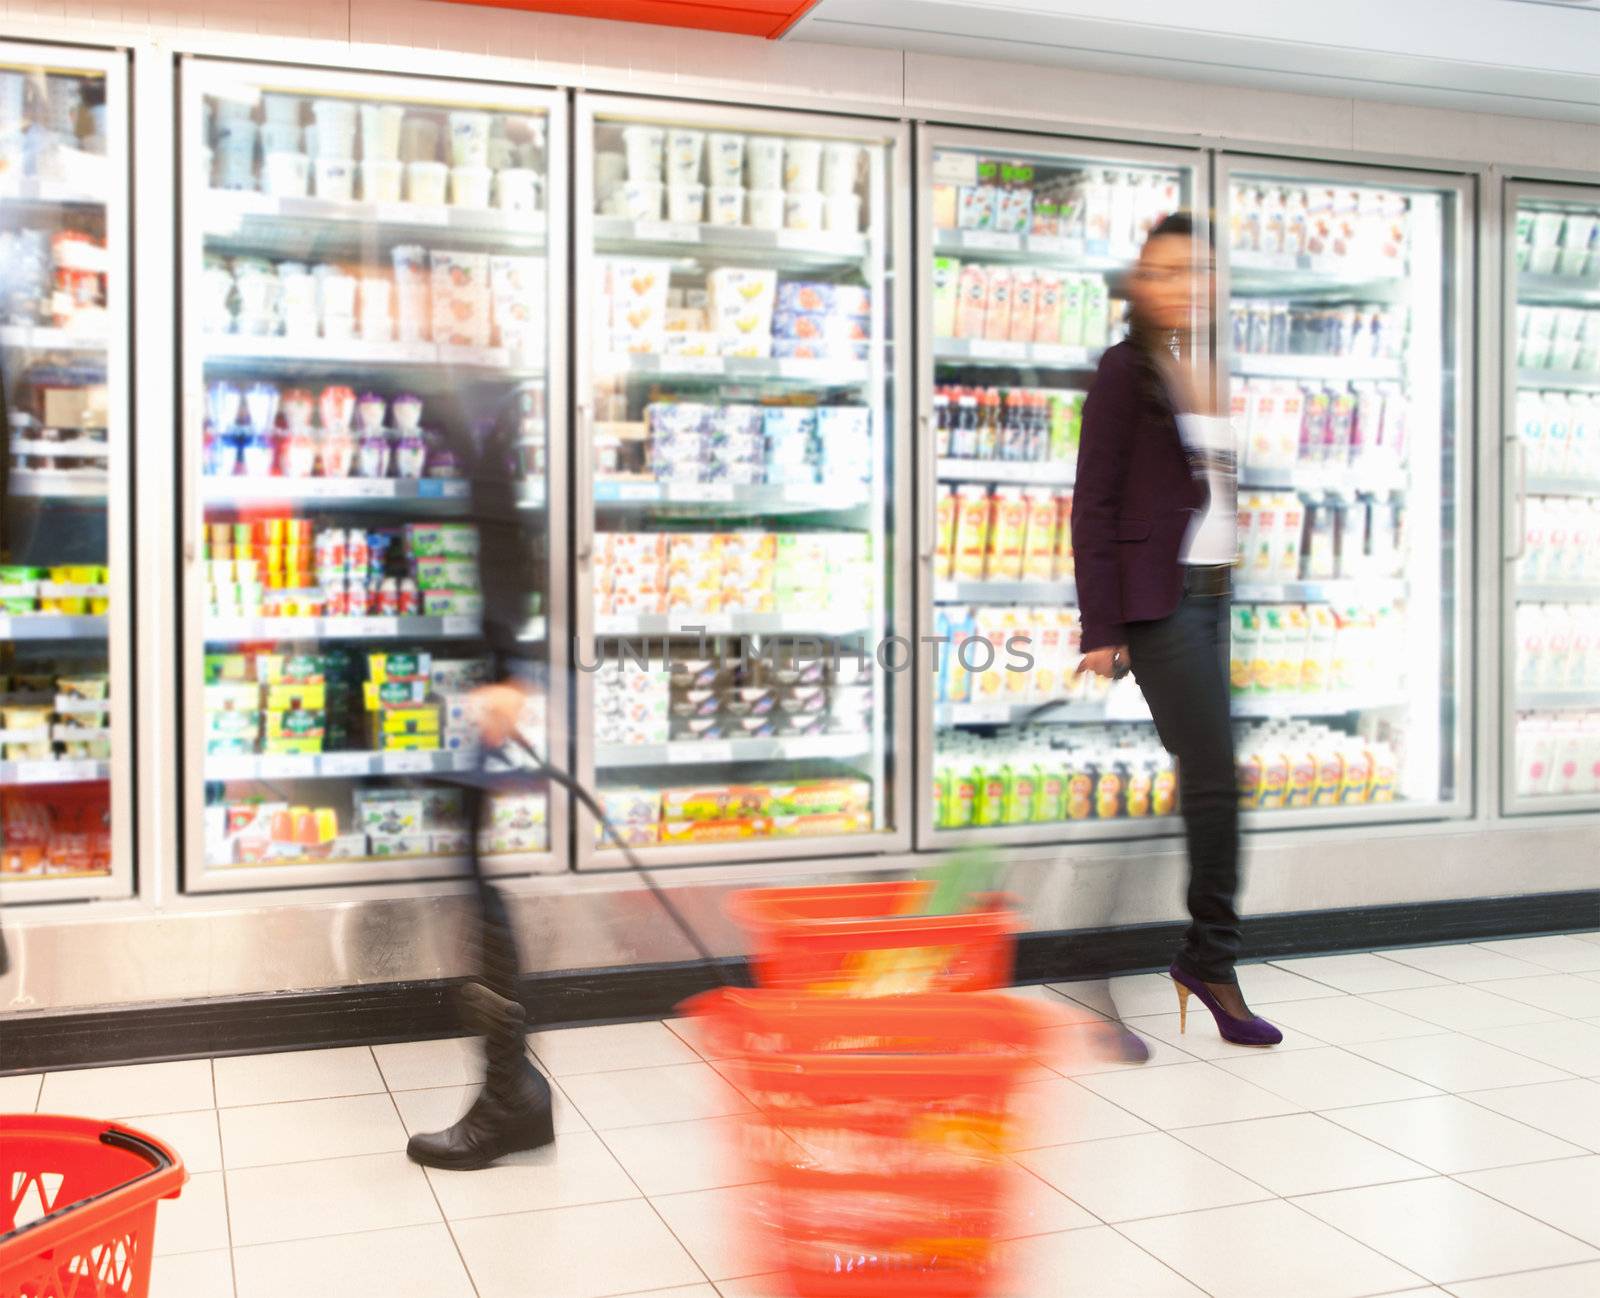 Blurred motion of people walking near refrigerator in shopping centre with baskets